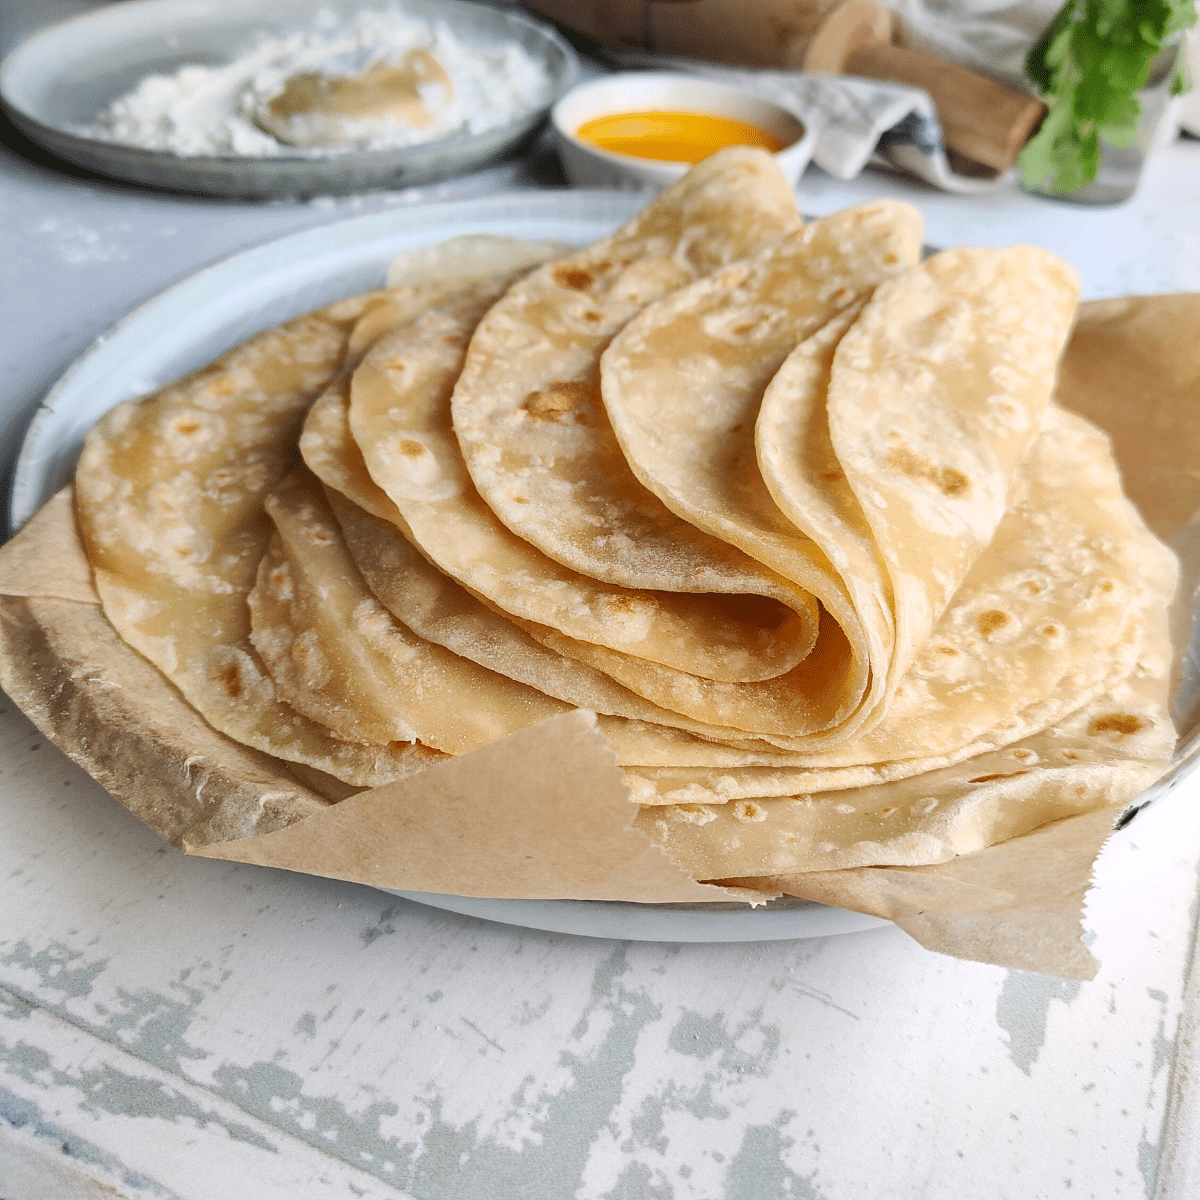 For softer and more flexible flatbreads, use hot water , about 120-130°F (49-54°C) when making the dough.